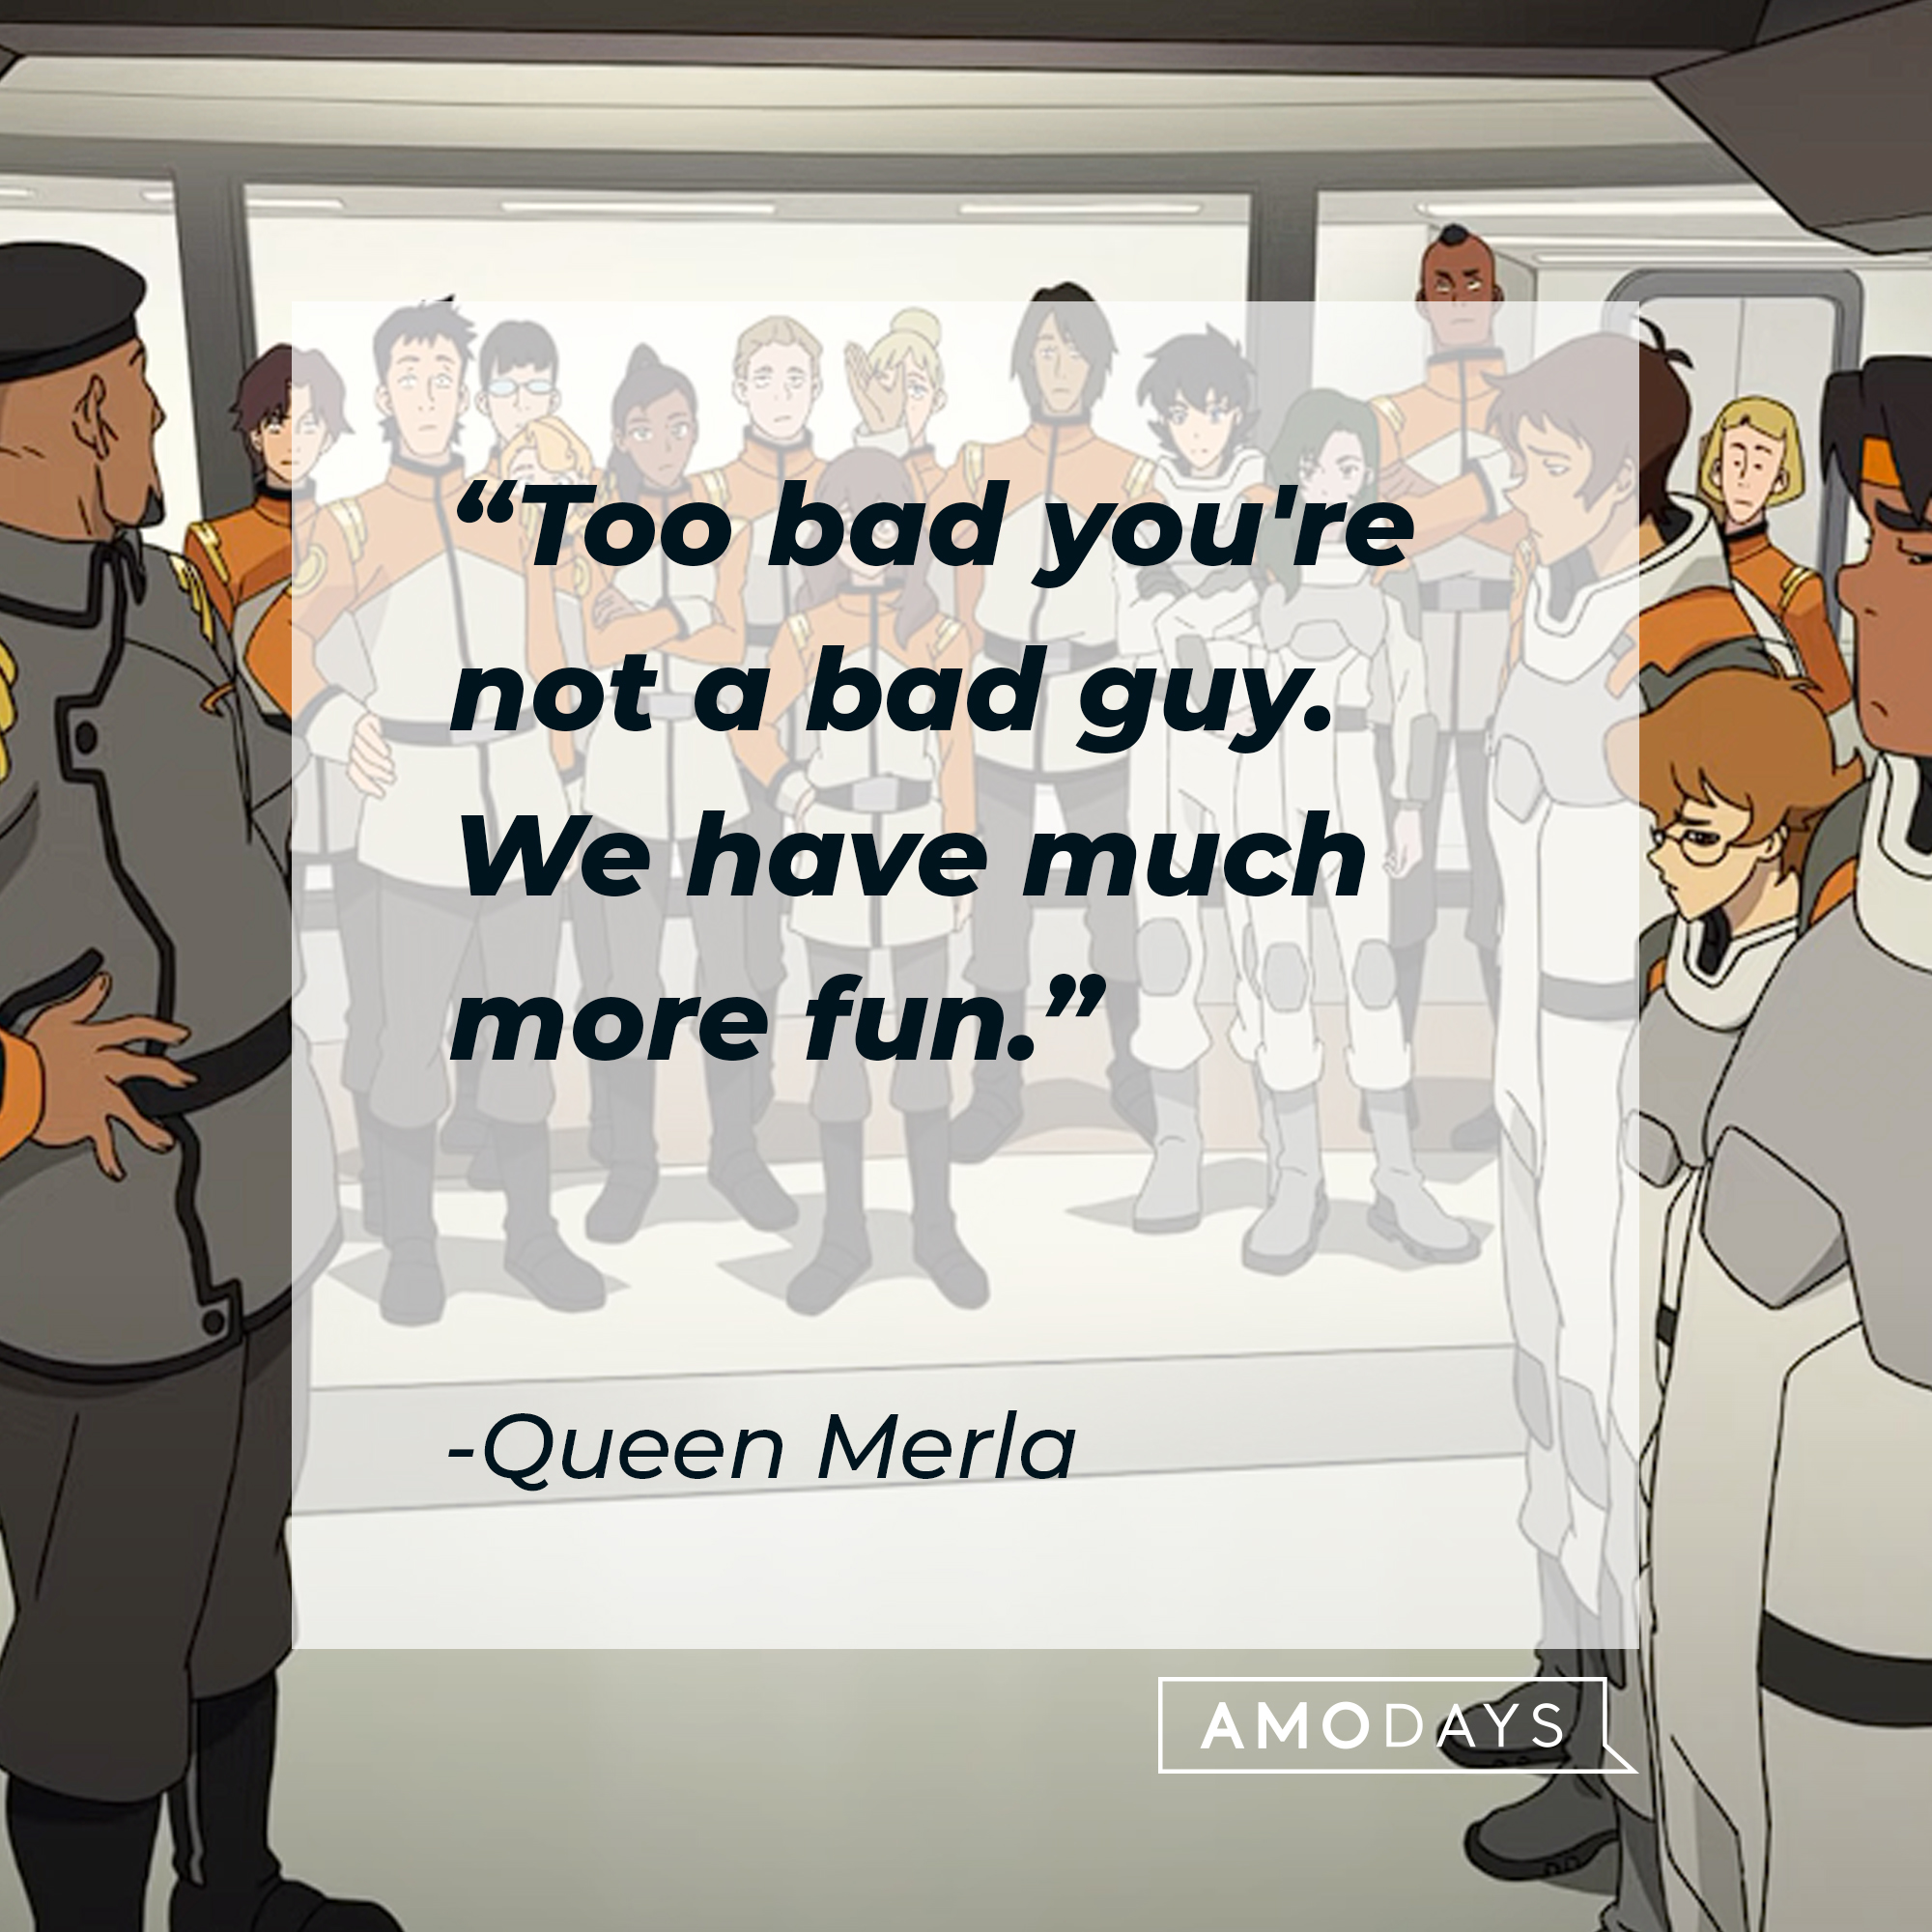 Queen Merla's quote: "Too bad you're not a bad guy. We have much more fun." | Source: youtube.com/netflixafterschool